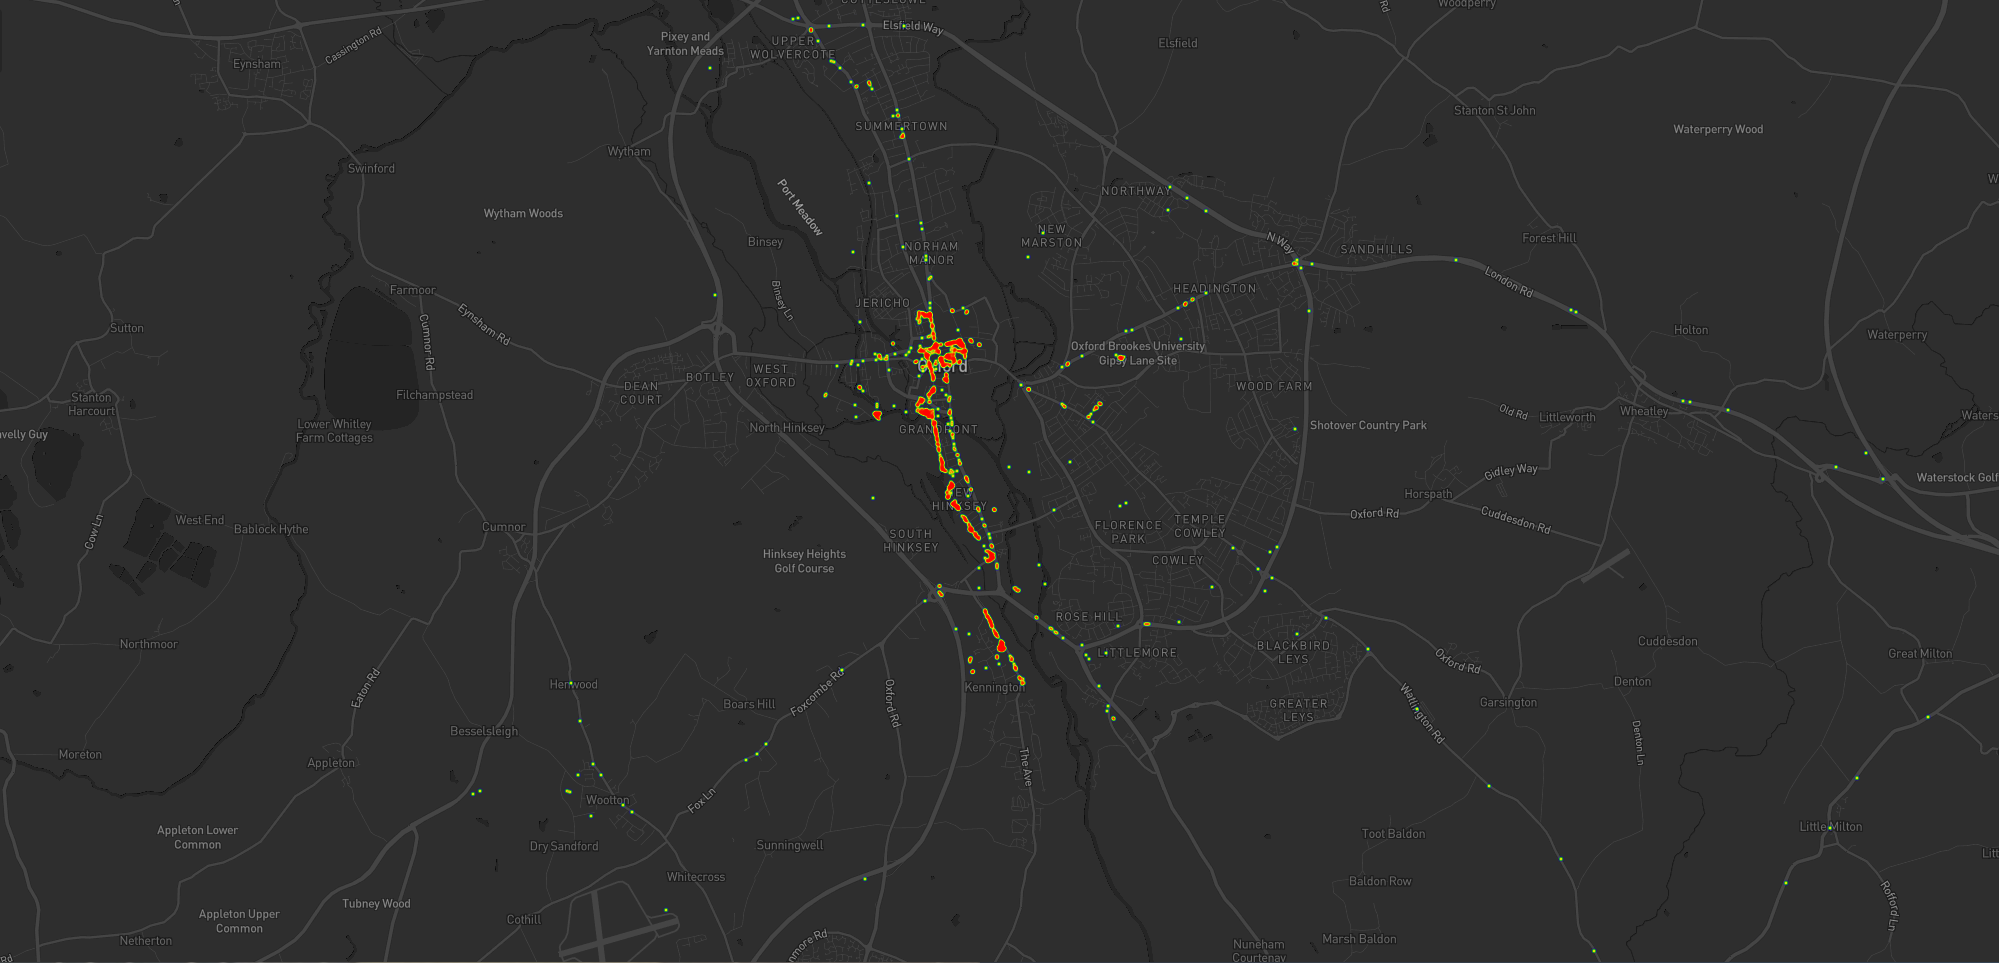 Heatmap showing Dan's movements around Oxford during the period he lived in Kennington. Again, it's dominated by time at home, in the city centre, and commuting between the two.